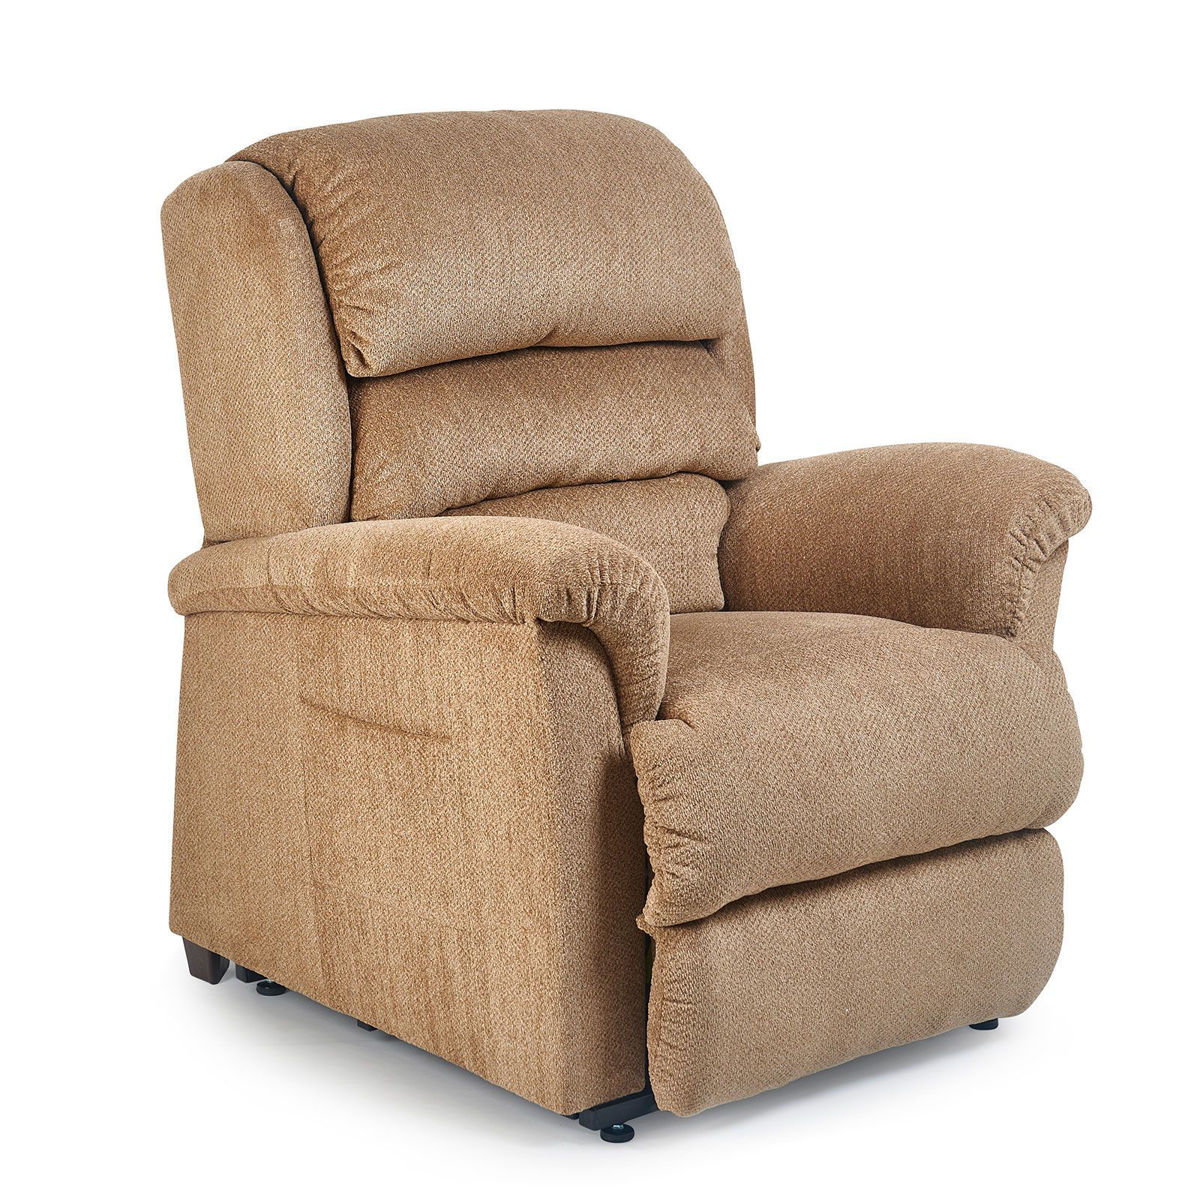 Picture of Mira Small Wicker Lift Chair